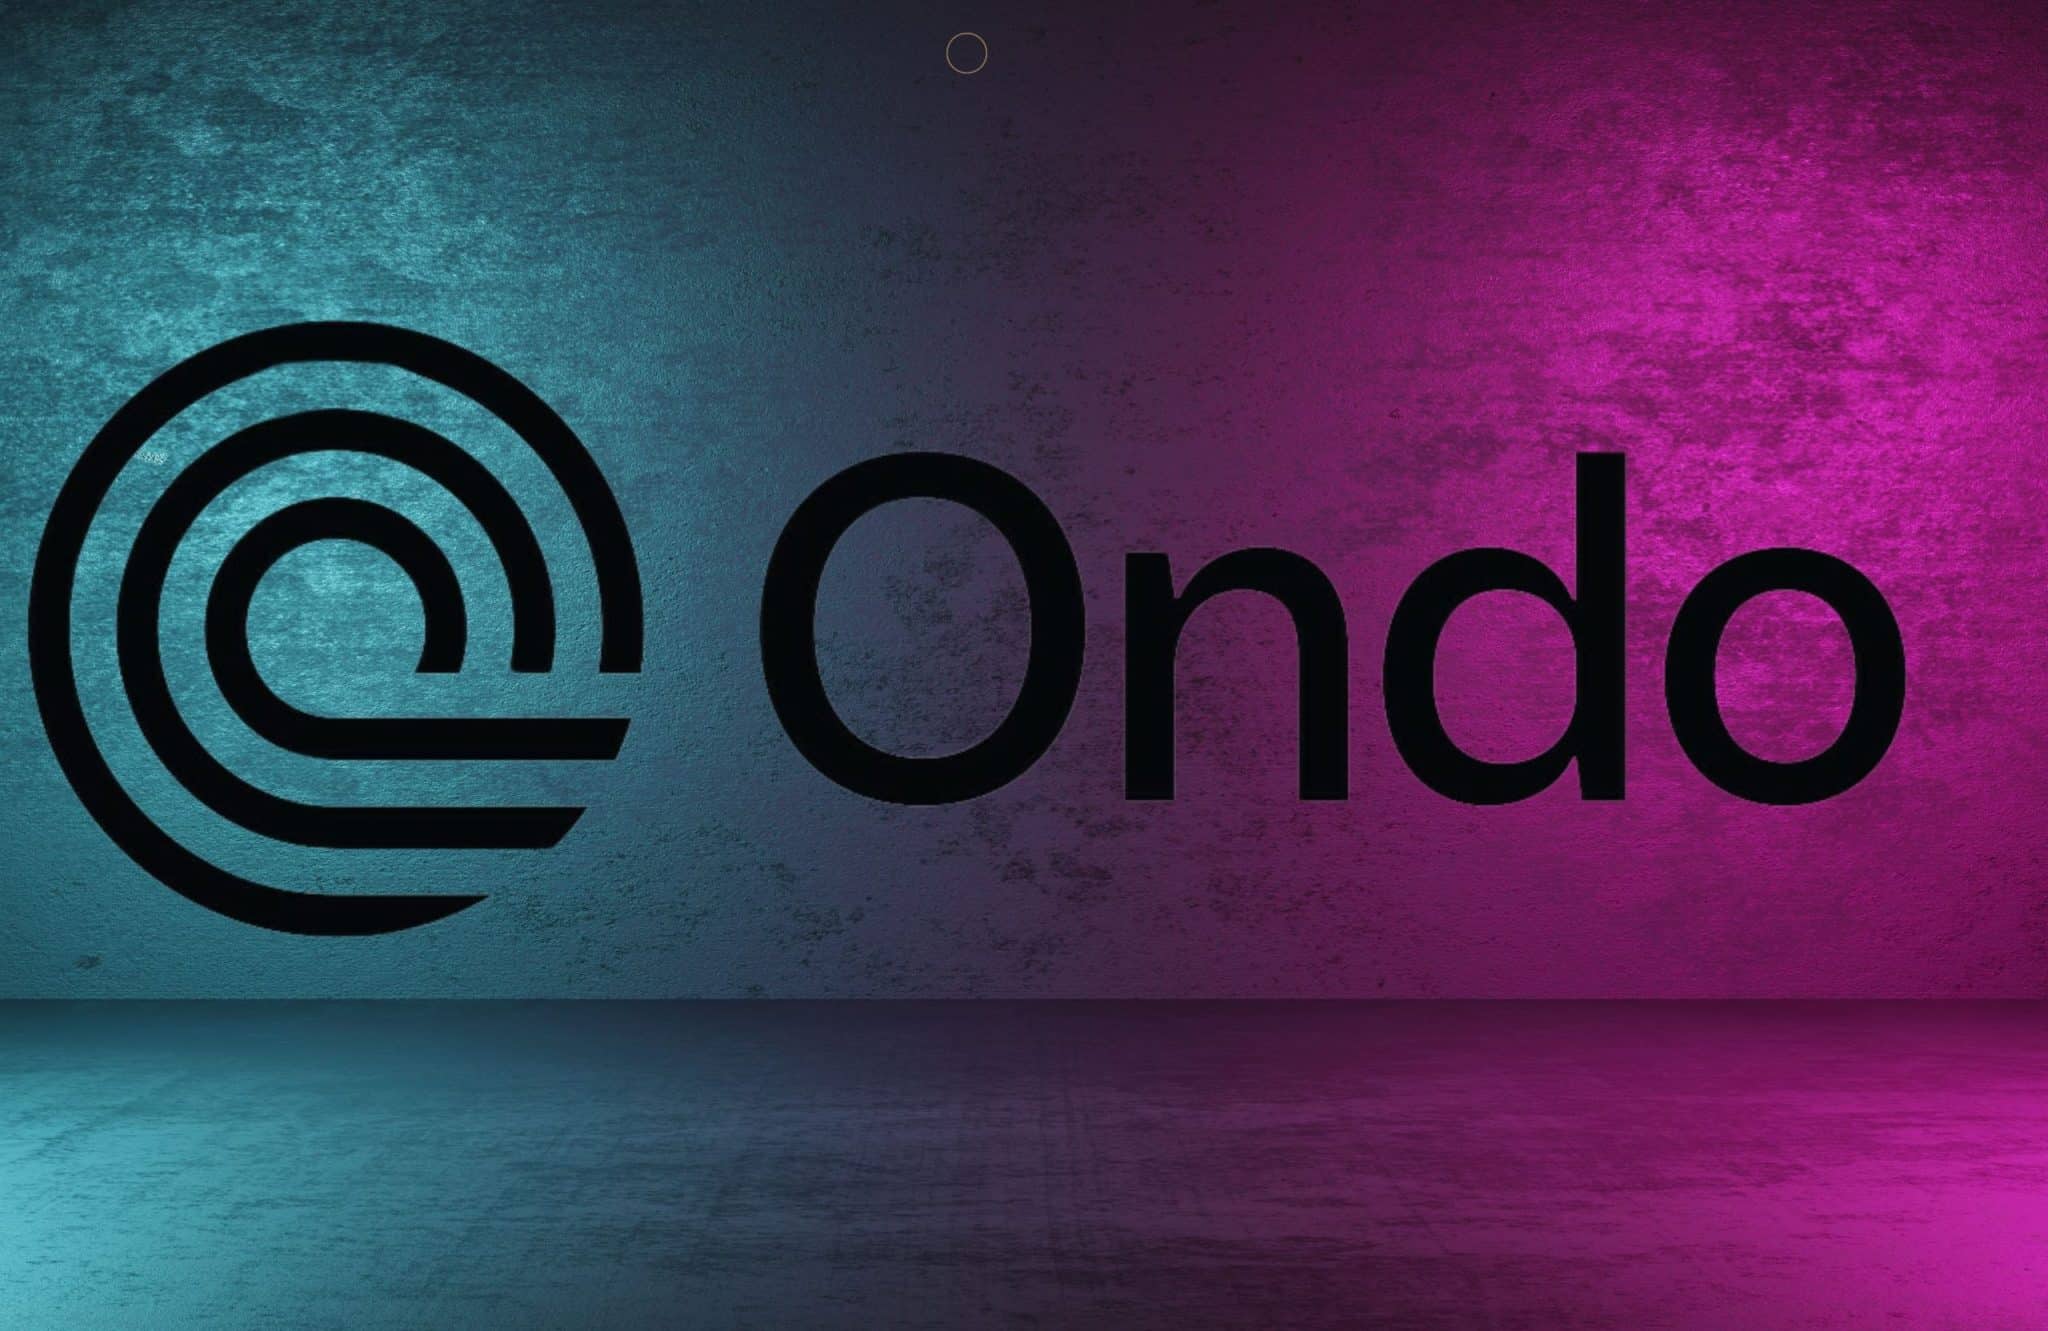 RWA Narrative is Back? ONDO crypto project skyrockets after SEC approval of Ethereum spot ETFs. Find out why ONDO price surged by +13.26%.